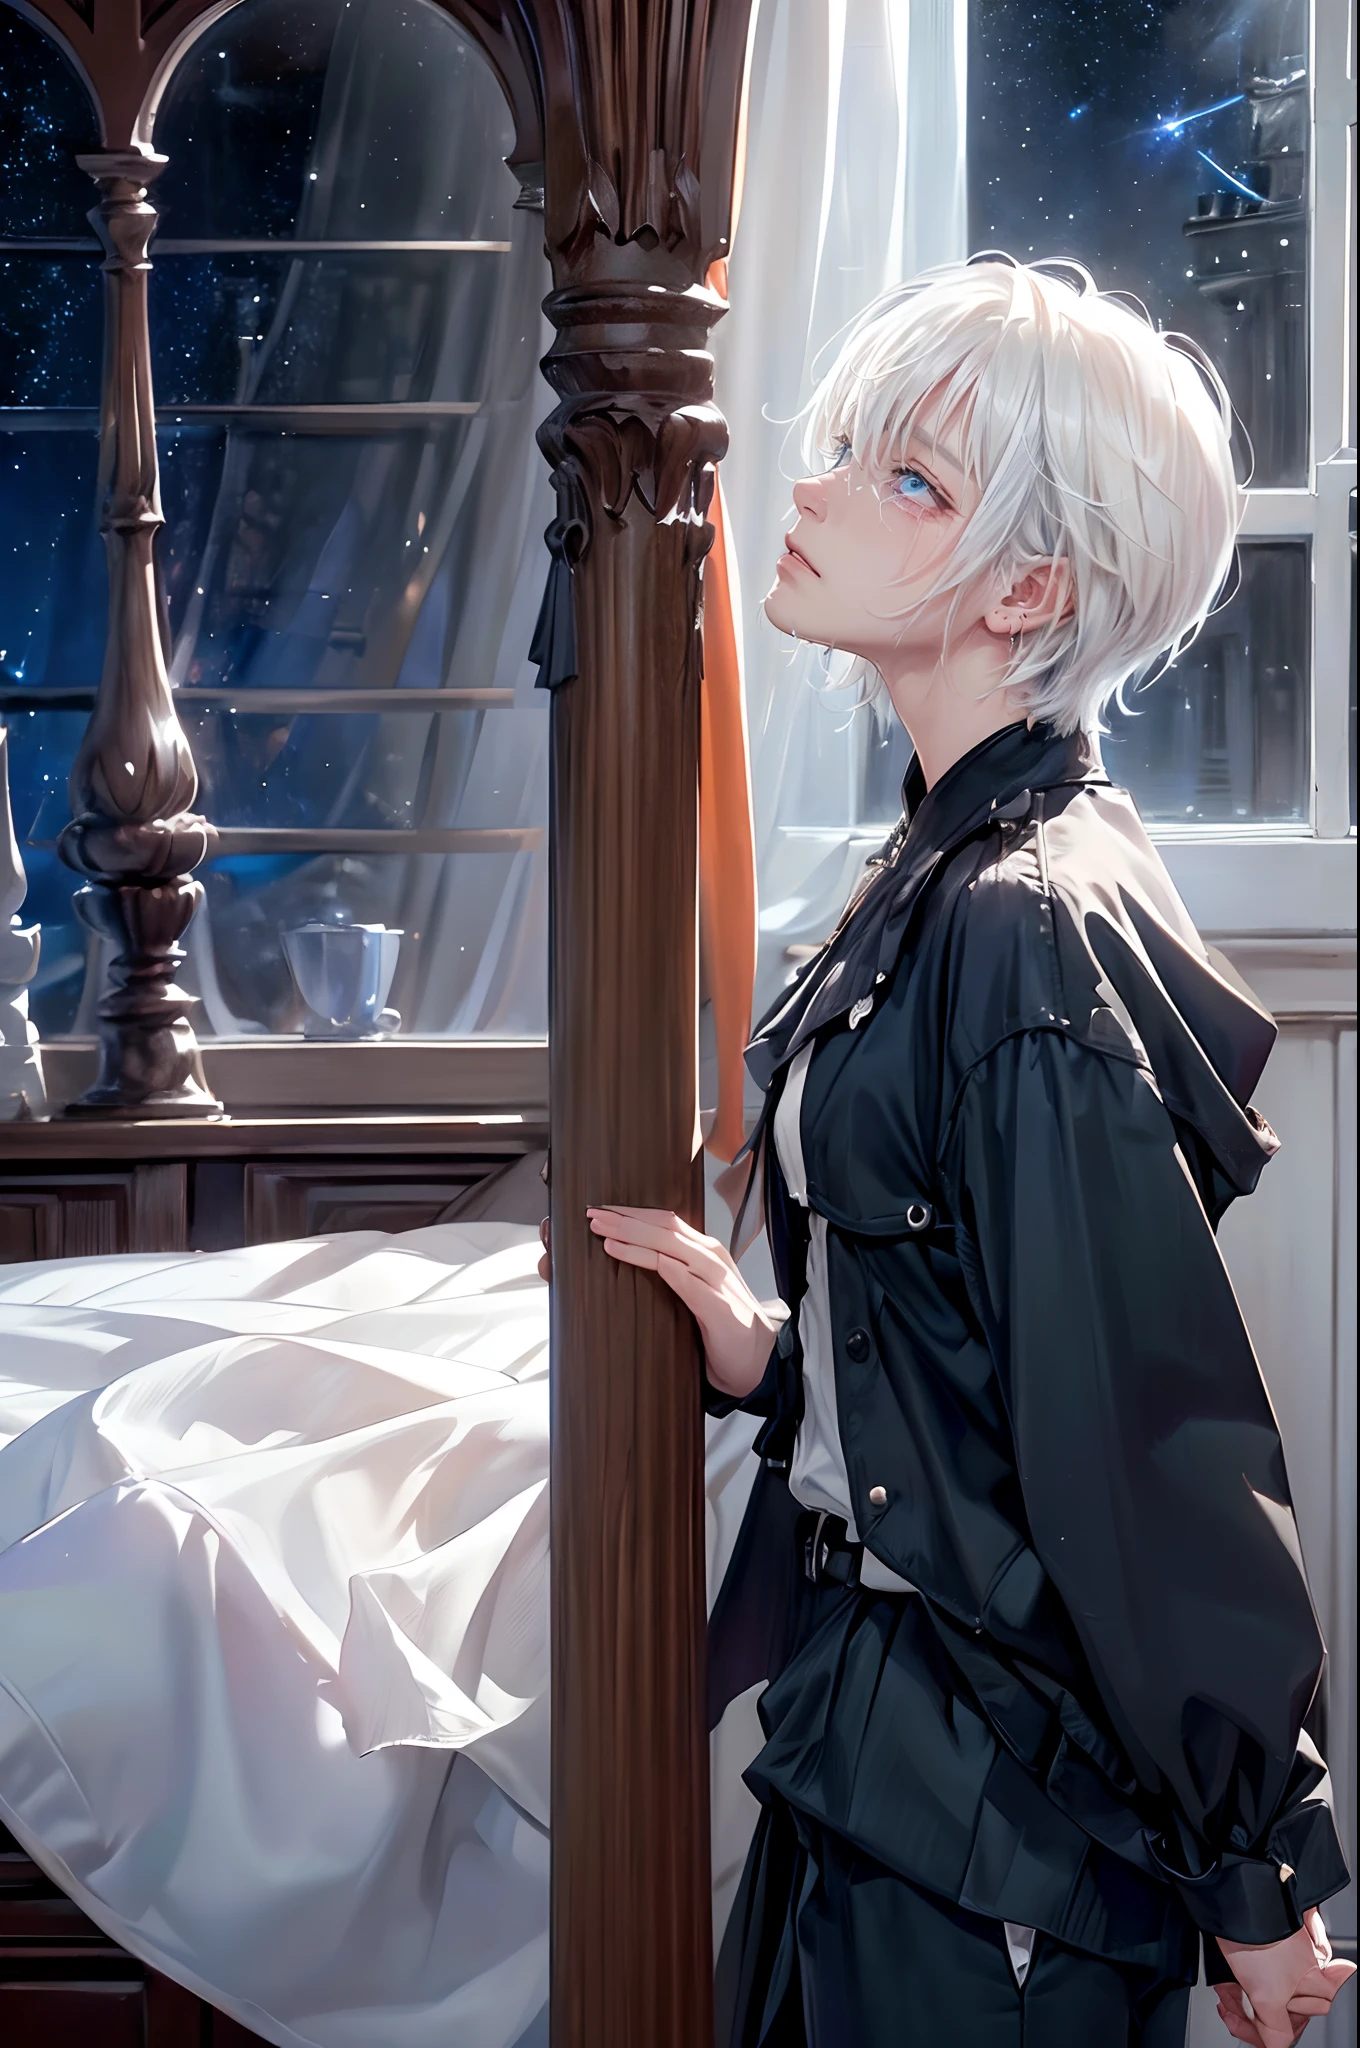 ((4K works))、​masterpiece、(top-quality)、One beautiful boy、Slim body、tall、((Black Y-shirt and white pants、Charming British knight style))、Please wear one jacket、(Detailed beautiful eyes)、Fantastic Night、((You can see the starry sky from the window))、Fantastic room at midnight、((Face similar to Carly Rae Jepsen))、((Short-haired white hair))、((Smaller face))、((Neutral face))、((Bright blue eyes))、((American adult male))、((Adult male 26 years old))、((Cool Men))、((Like a celebrity))、((Crying expression))、((sad look))、((Korean Makeup))、((elongated and sharp eyes))、((Happy dating))、((boyish))、((Upper body photography))、Professional Photos、((Shot alone))、((She is looking up at the sky under the roof))、((Shot from the side))、((Crying profile))、((Face crying in pain))、((He is looking upwards))、((His eyes are looking down))、((He stands in the corner of the room))、((He who cries))、I'm crying on a stick.、Man crying while standing、Solitude、saddened、desolate、suffocating、heartbreaking、auw、agony、Tears dripping on the cheeks